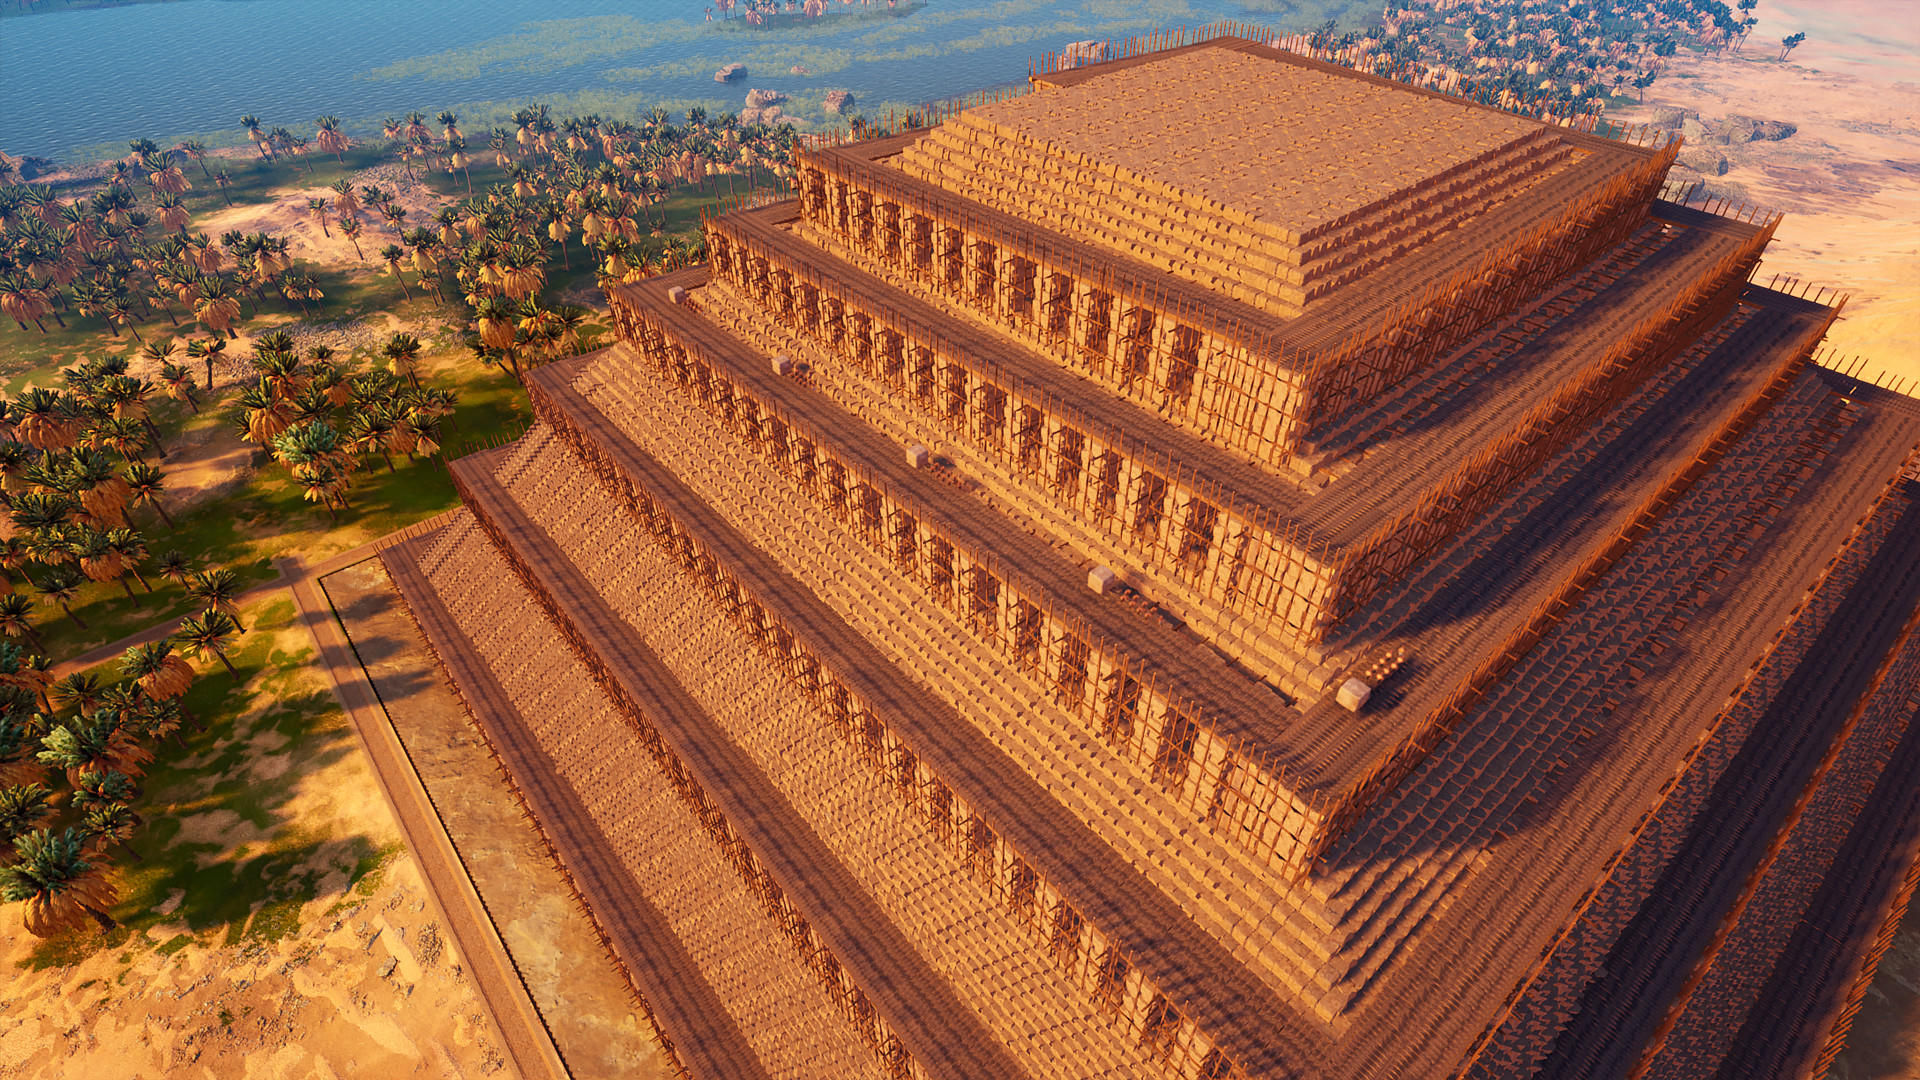 Builders of Egypt: First pyramid screenshot game